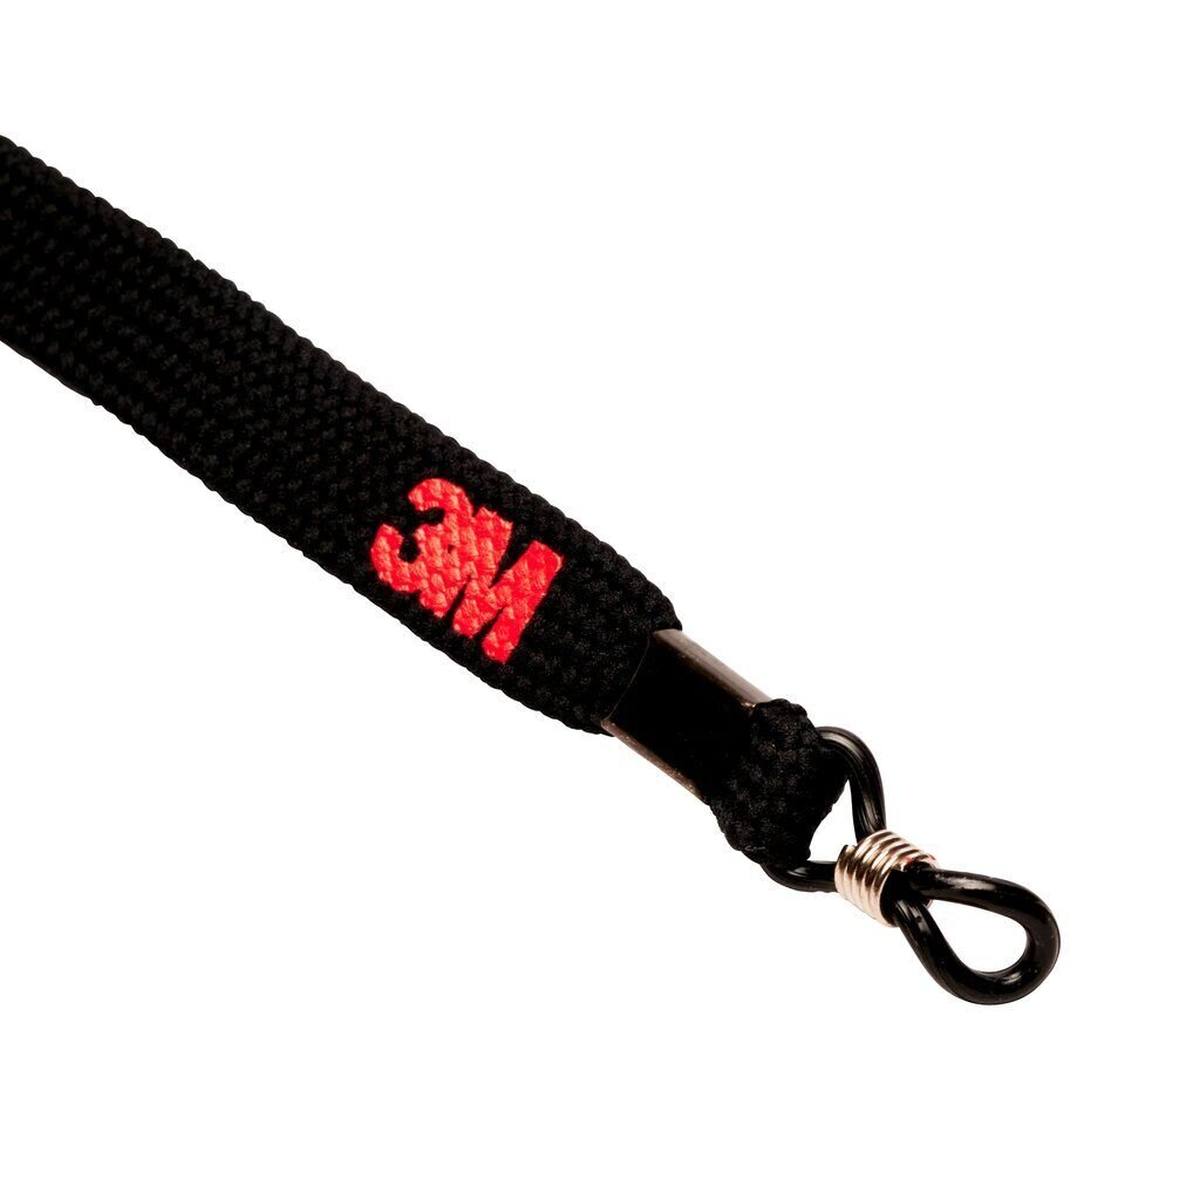 3M spectacle strap 272 Safety spectacle retaining strap with predetermined breaking point Strap4